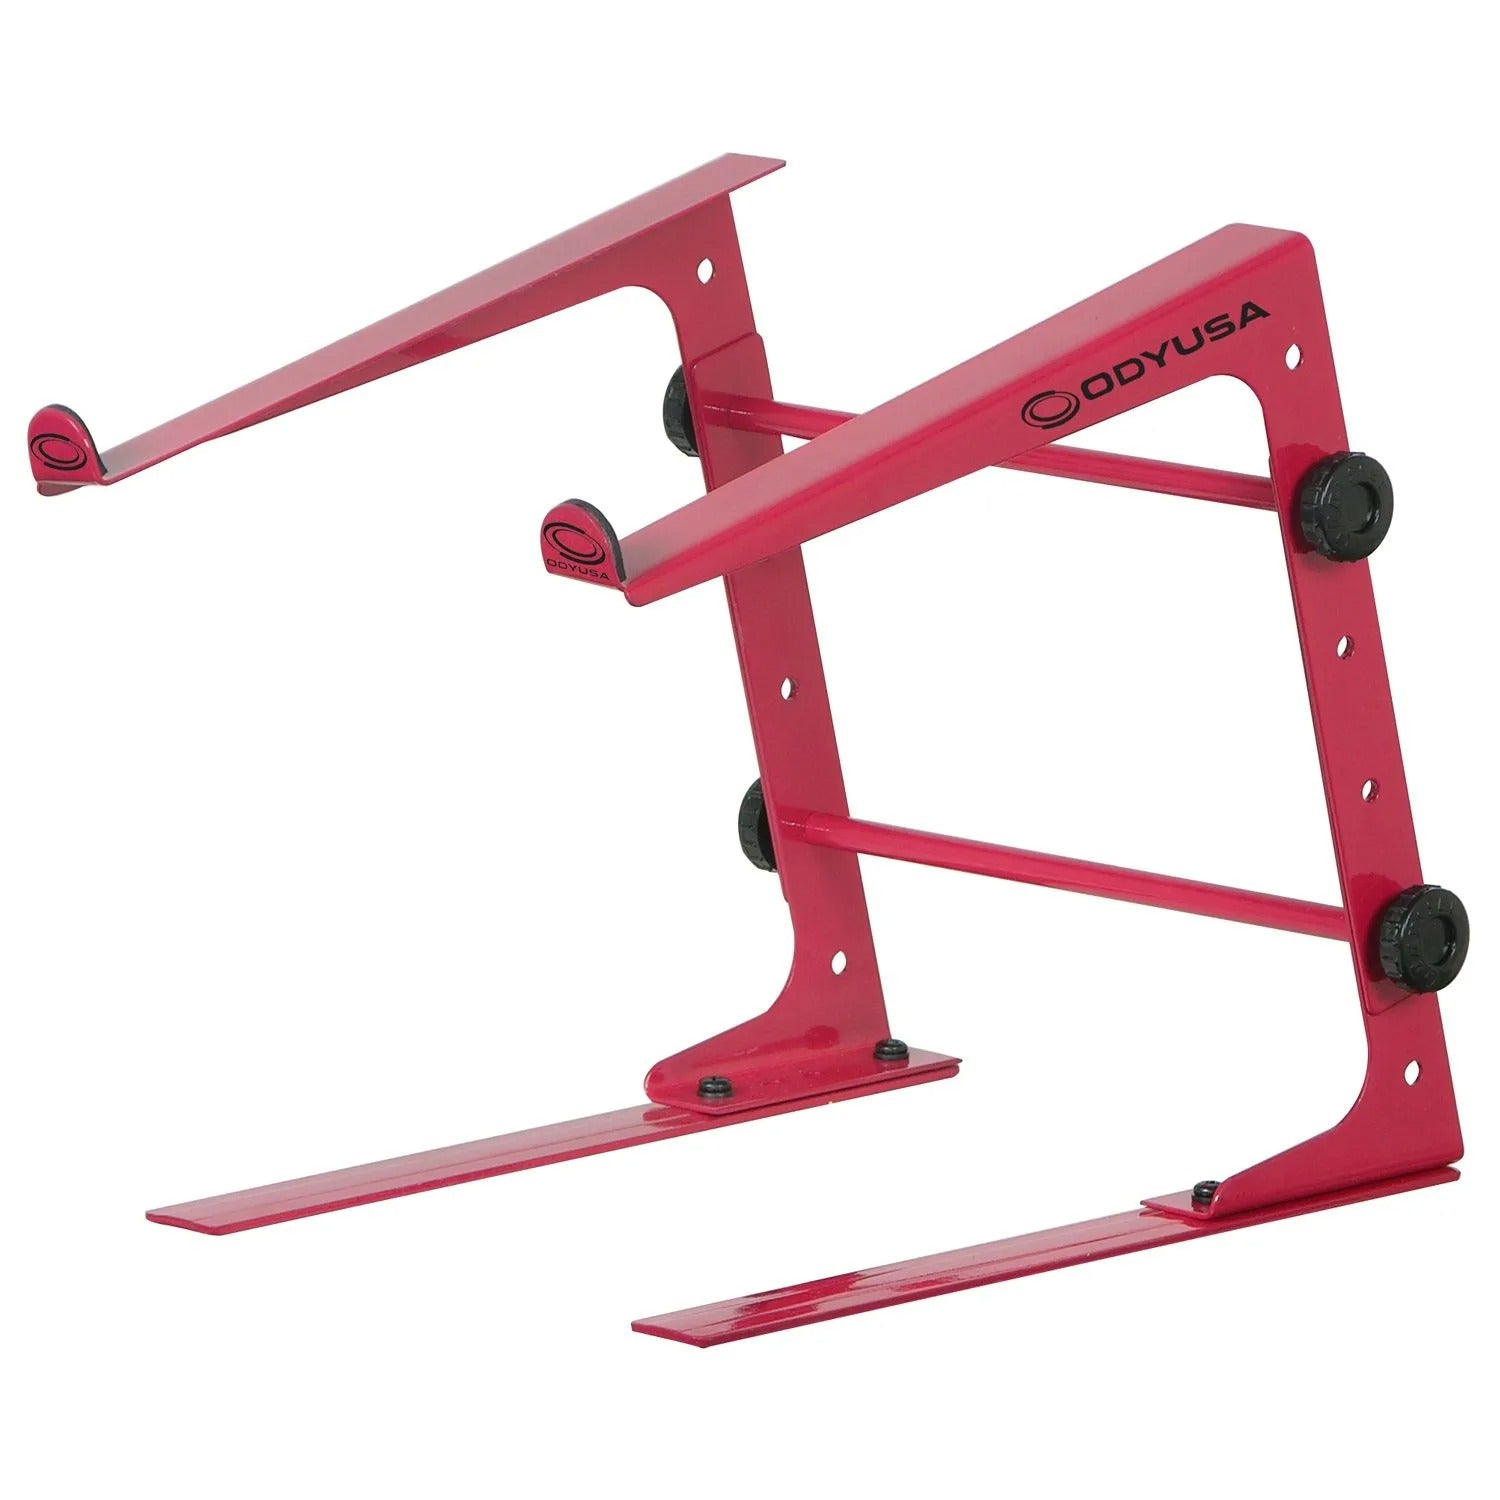 B-Stock: Odyssey LSTANDSRED, DJ Table Top Laptop Stand - Red by Odyssey